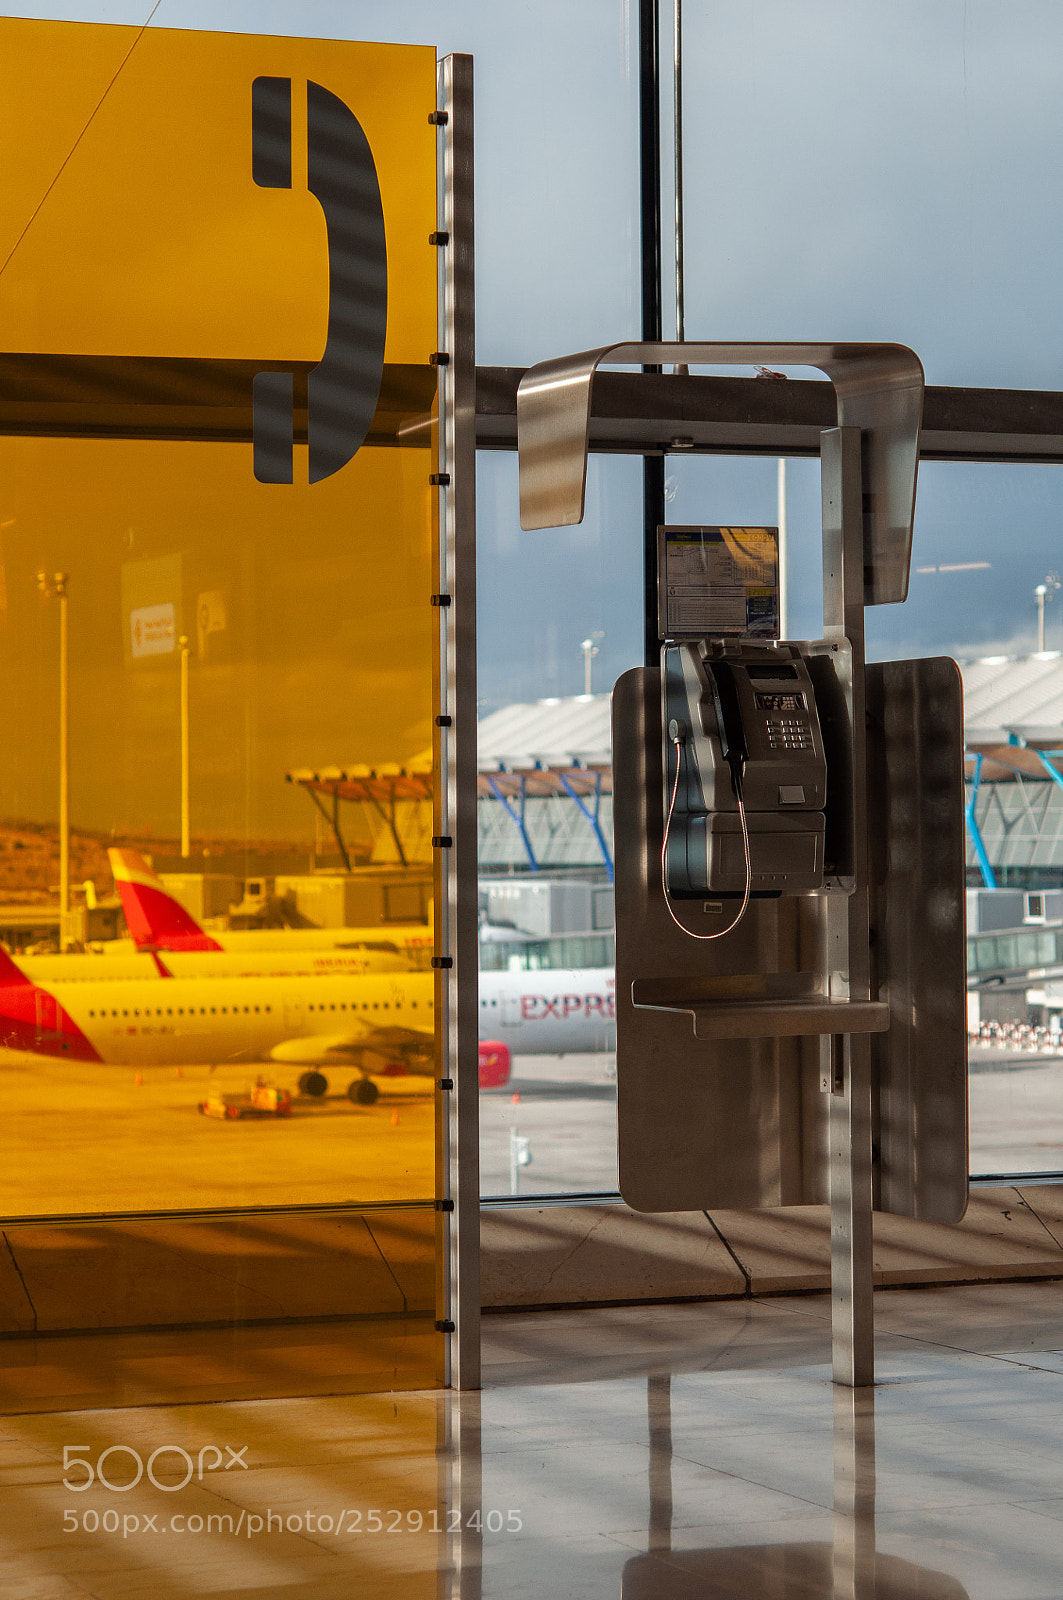 Nikon D90 sample photo. Public telephone in airport photography